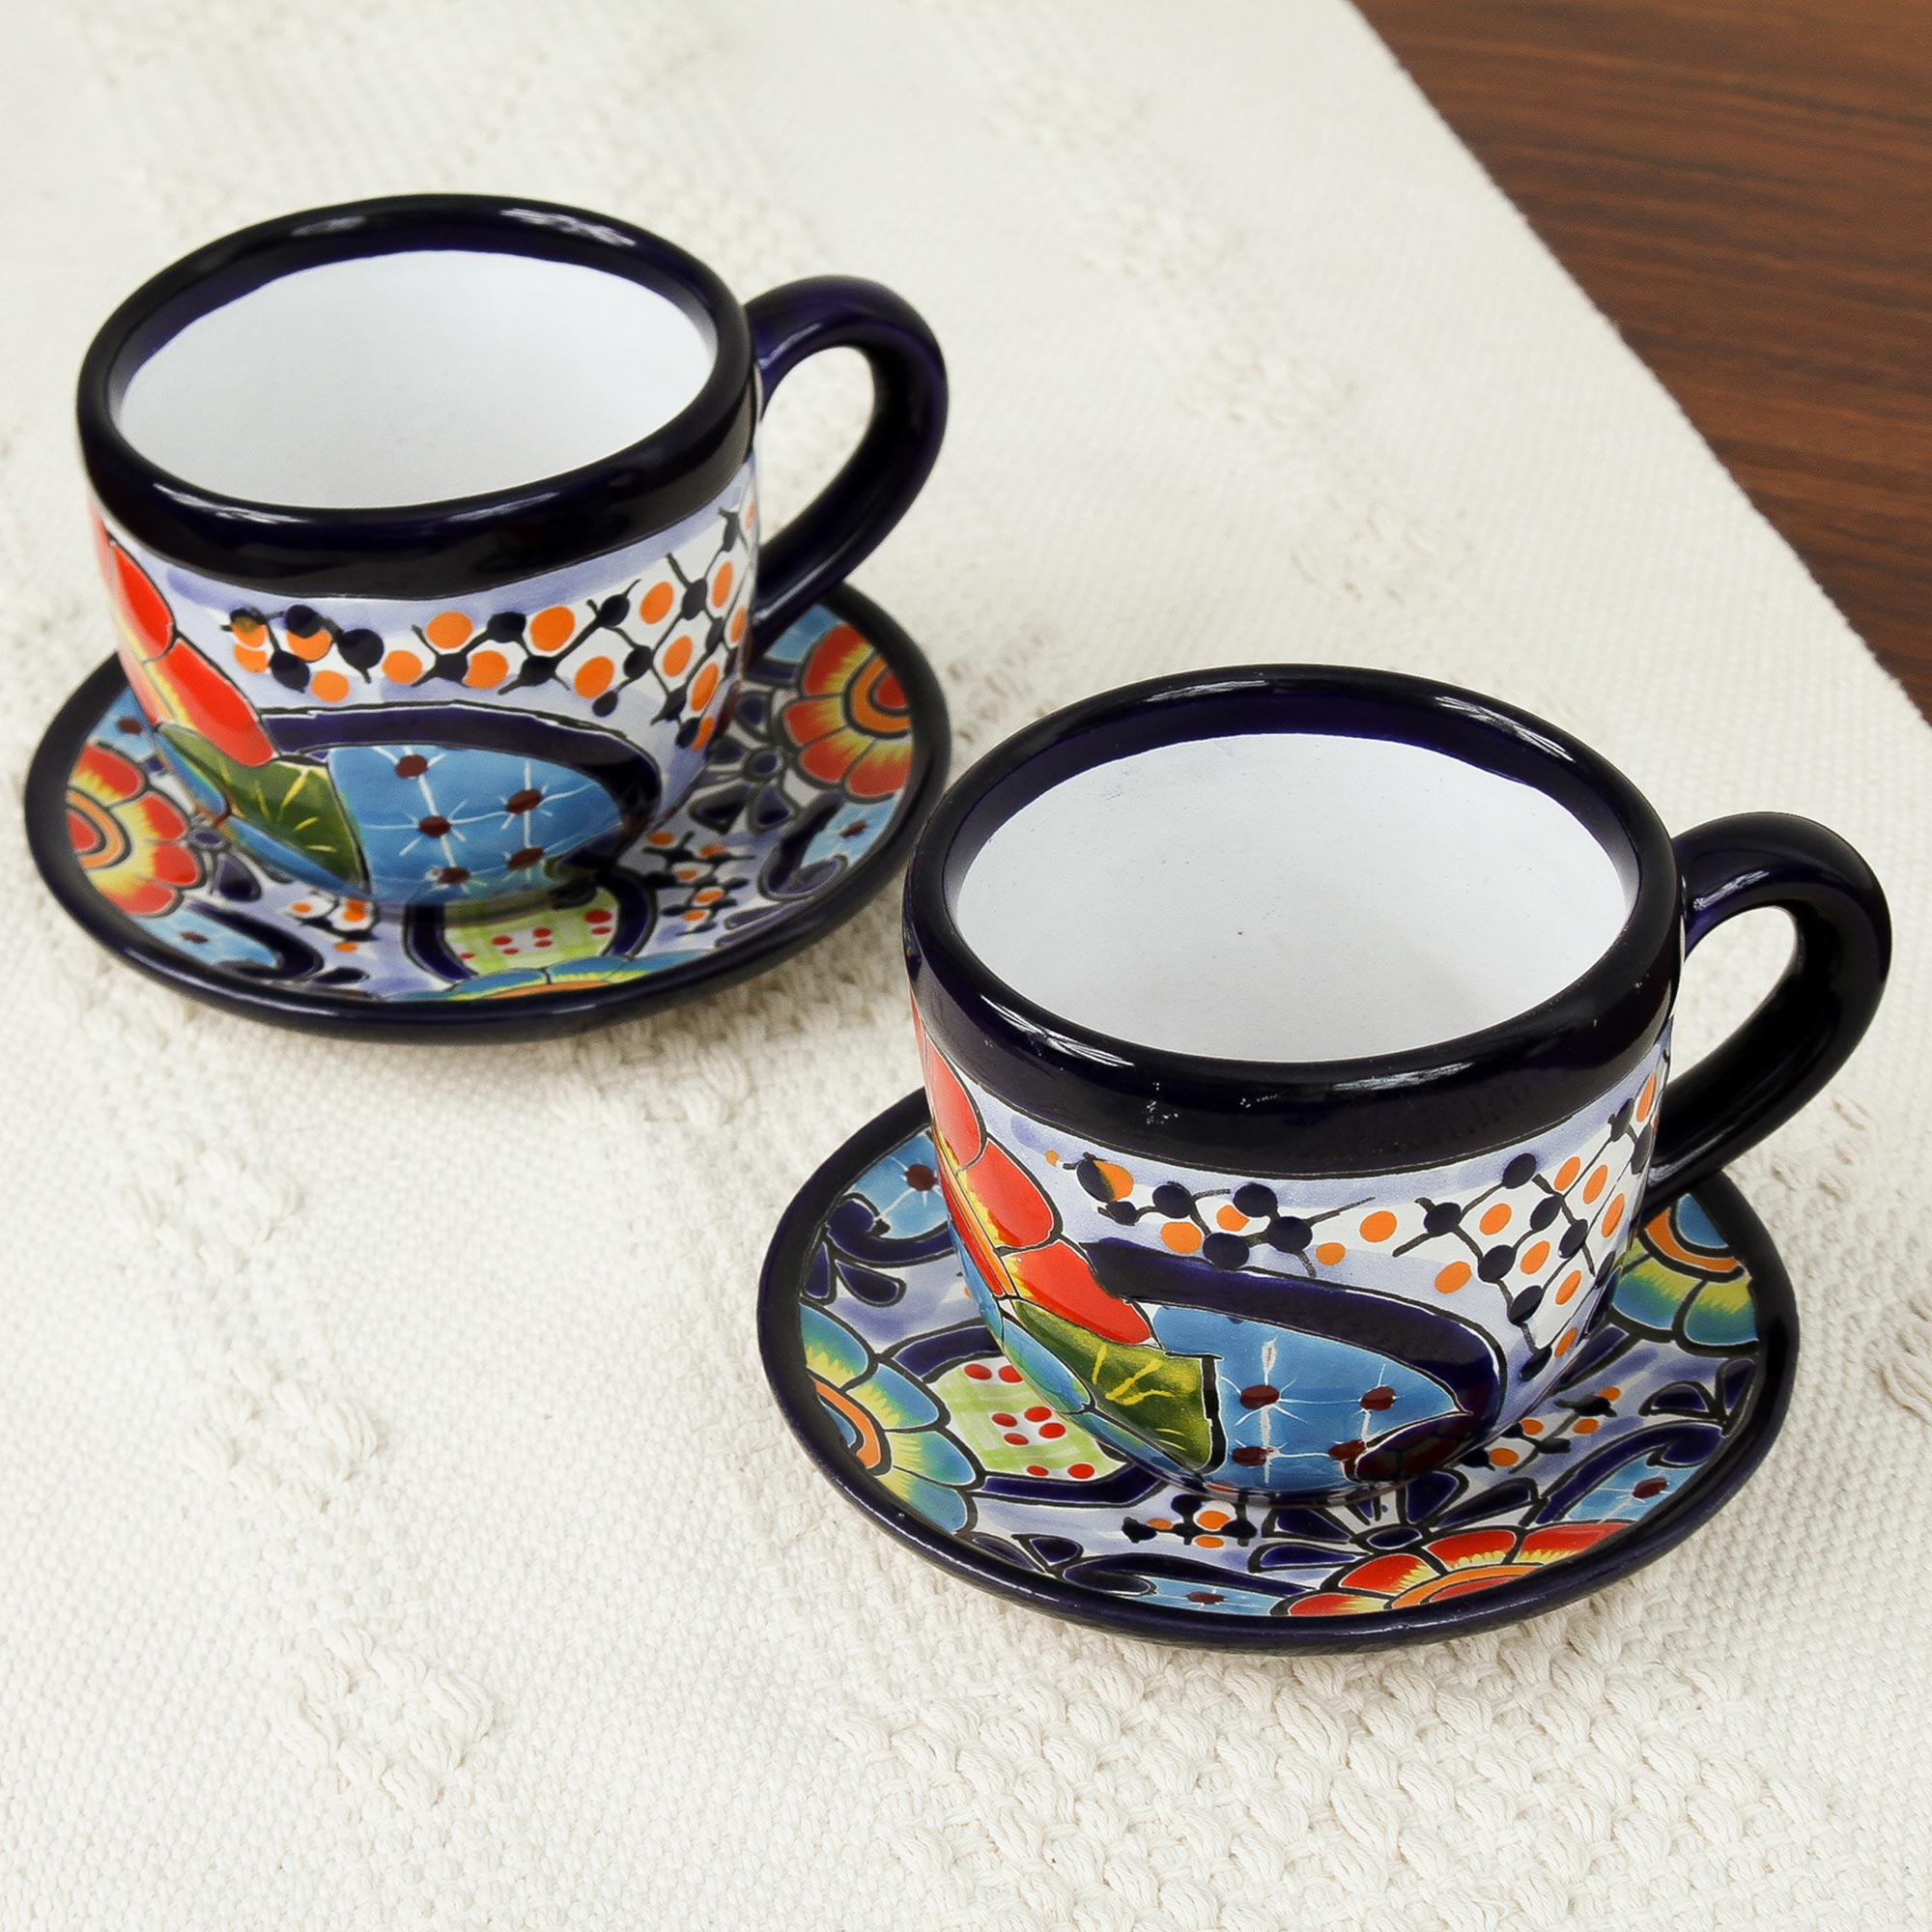 Mugs and Saucers Set of 2, Handmade Large Pottery Wheel-thrown Mugs and  Matching Saucers, Modern Unique Ceramic Coffee Cups / Teacups 